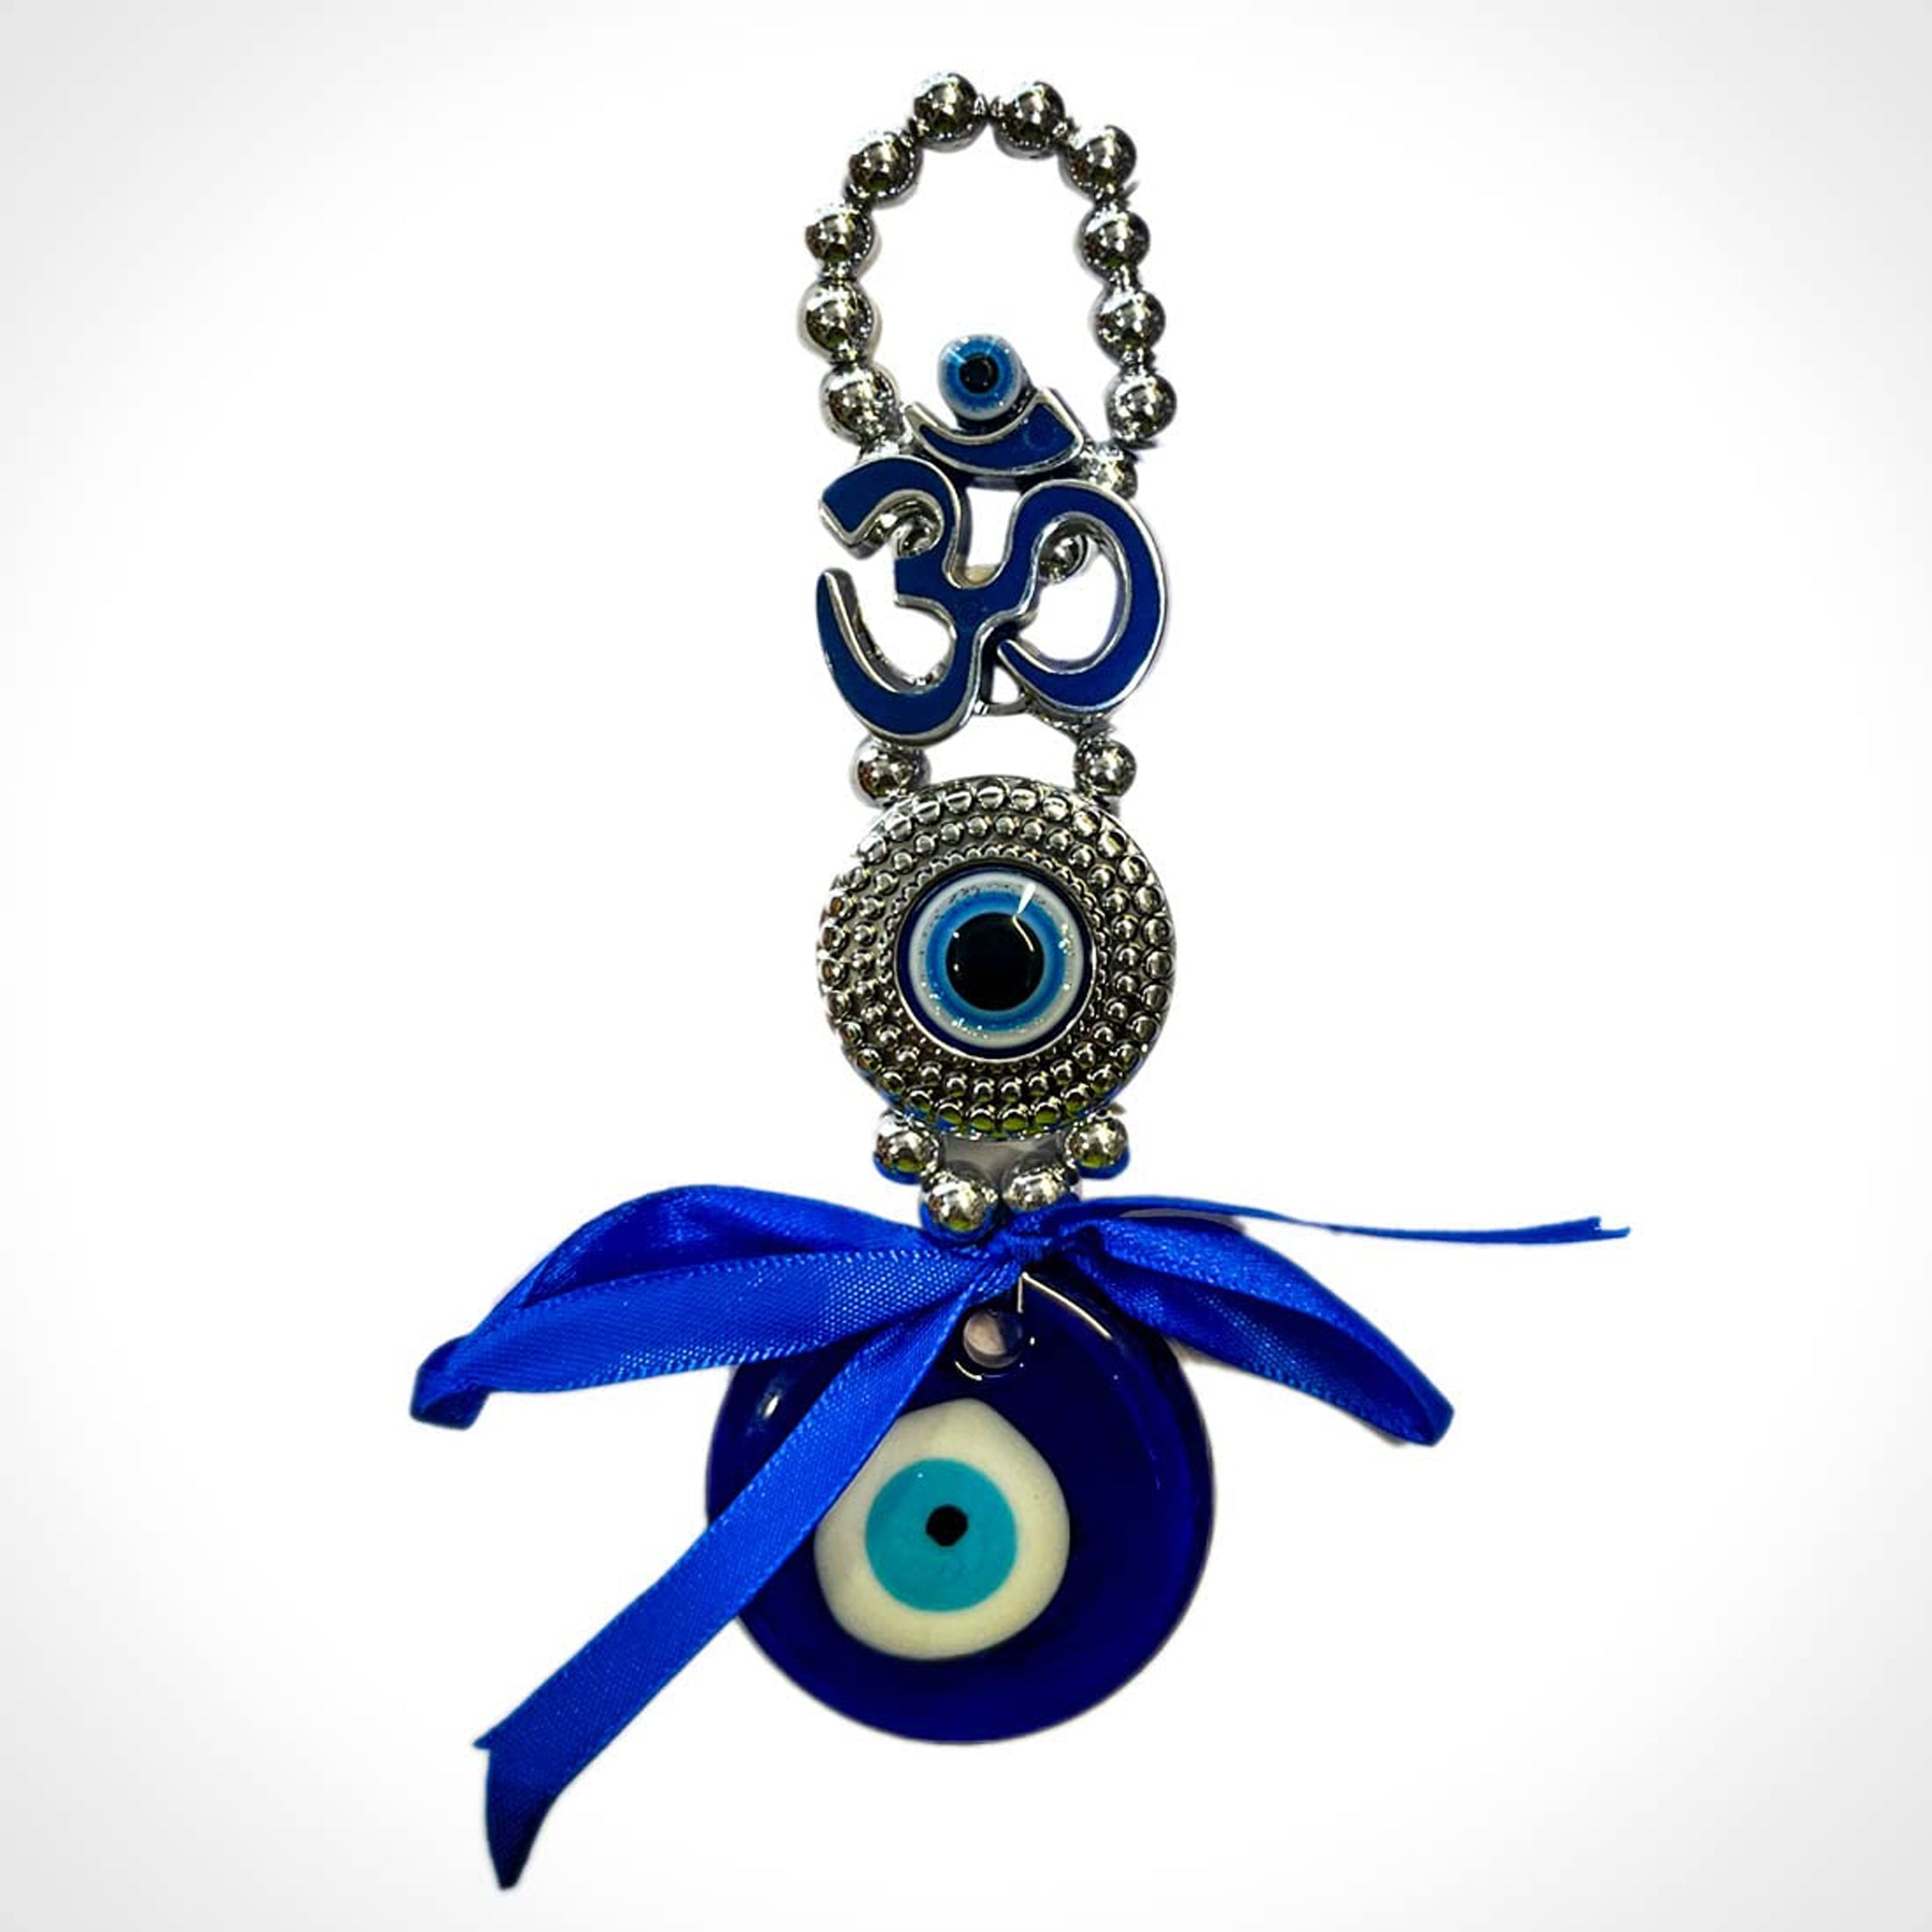 Blue Evil Eyes With OM Design With Blue Pendent Decoration Hanging Ornament For Car, Home Décor For Blessing